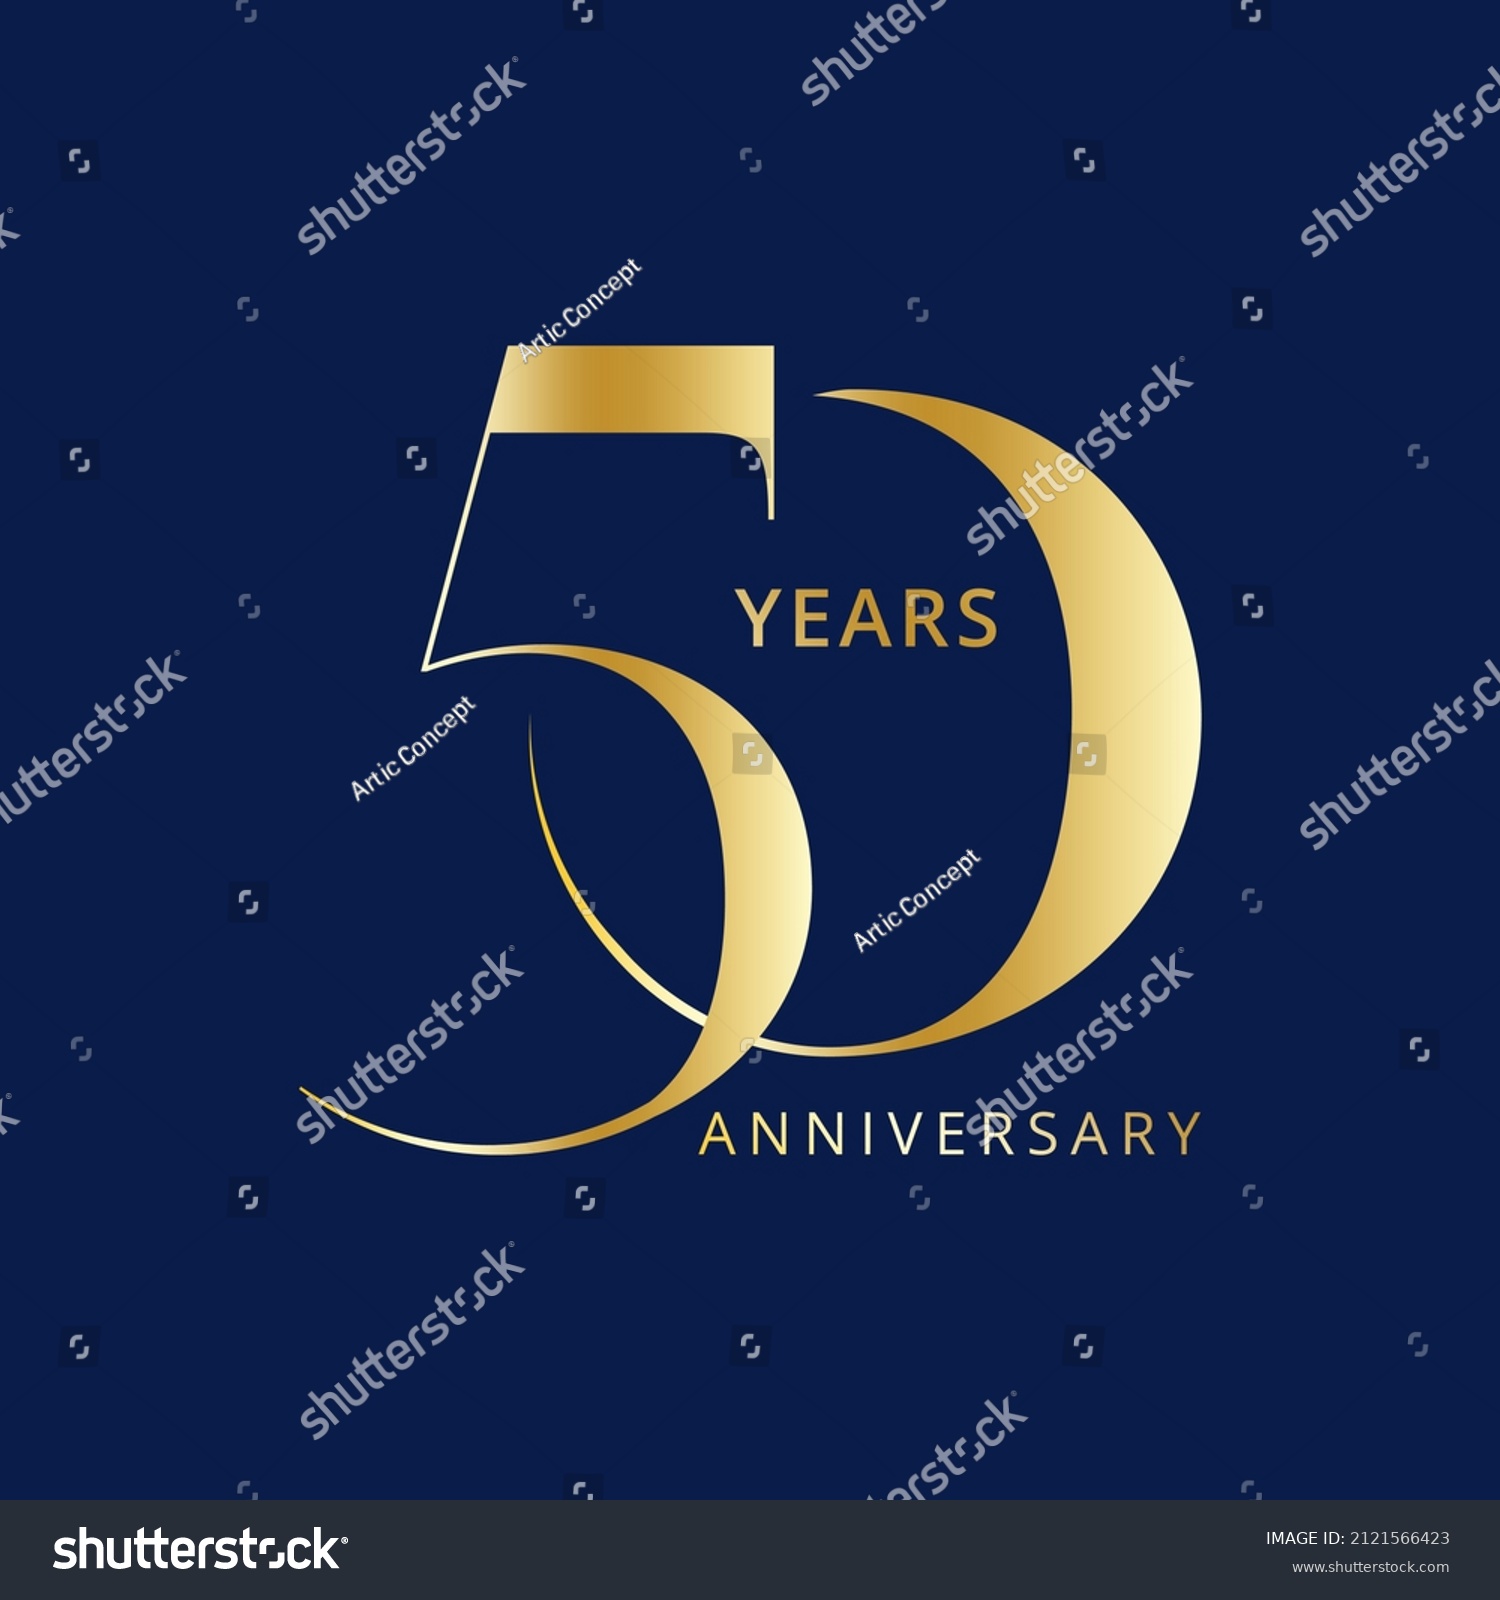 SVG of 50 Year Anniversary Logo, Golden Color, Vector Template Design element for birthday, invitation, wedding, jubilee and greeting card illustration. svg